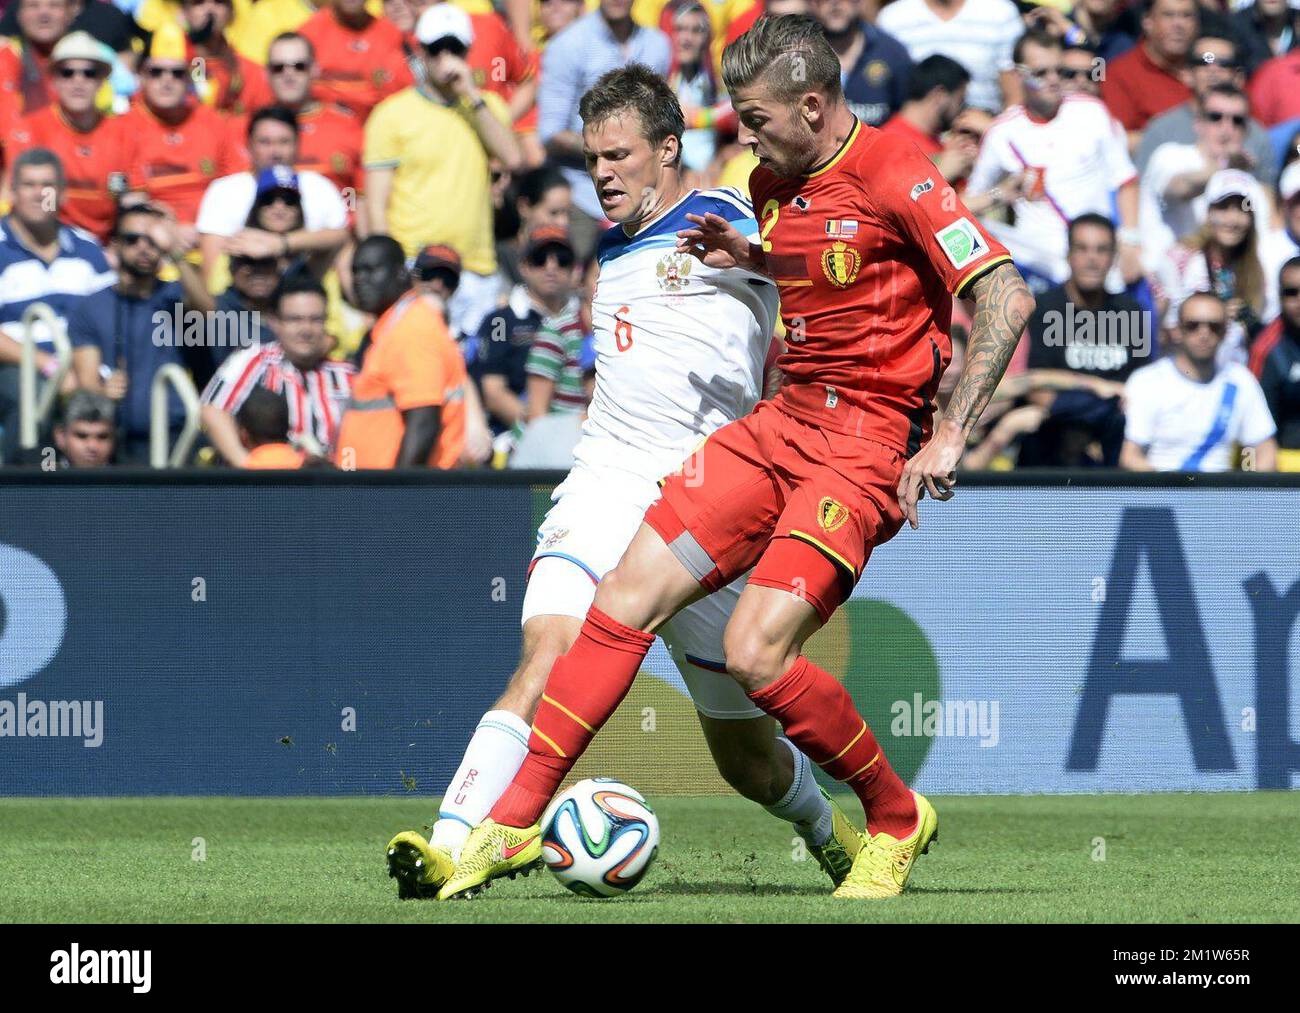 20140622 - RIO DE JANEIRO, BRAZIL: Russia's Maksim Kanunnikov and Belgium's Toby Alderweireld in action during a soccer game between Belgian national team The Red Devils and Russia in Rio de Janeiro, Brazil, the second game in Group H of the first round of the 2014 FIFA World Cup, Sunday 22 June 2014.   BELGA PHOTO DIRK WAEM Stock Photo